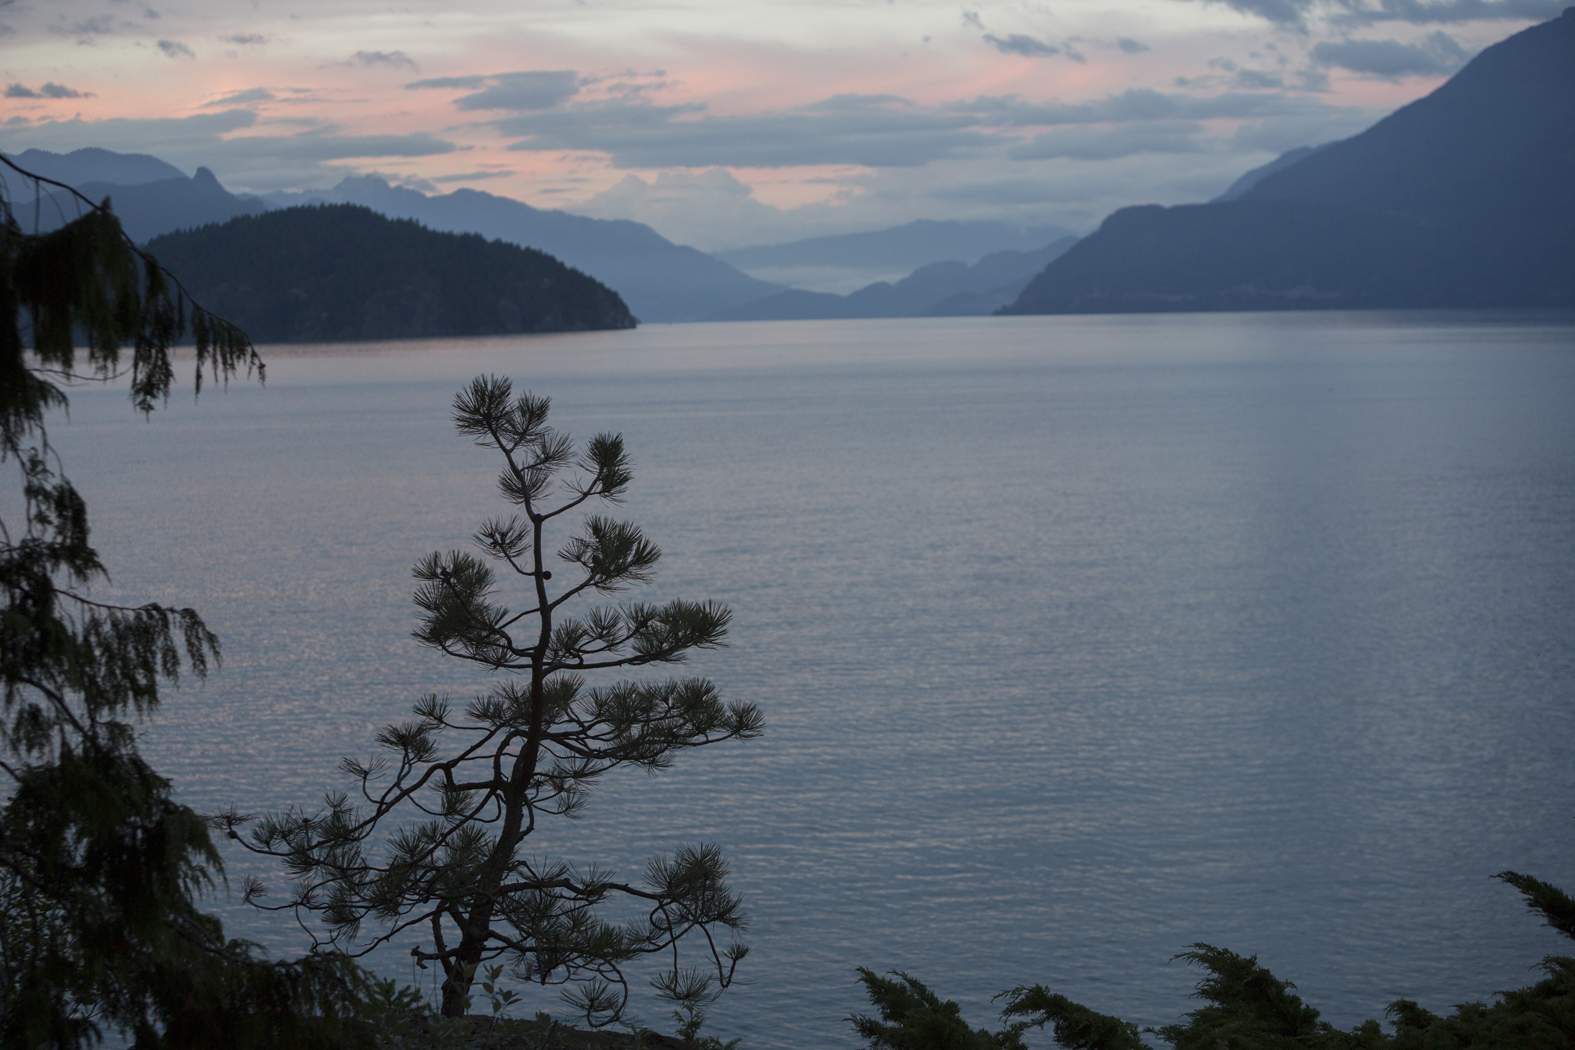  Howe Sound, BC, Canada     